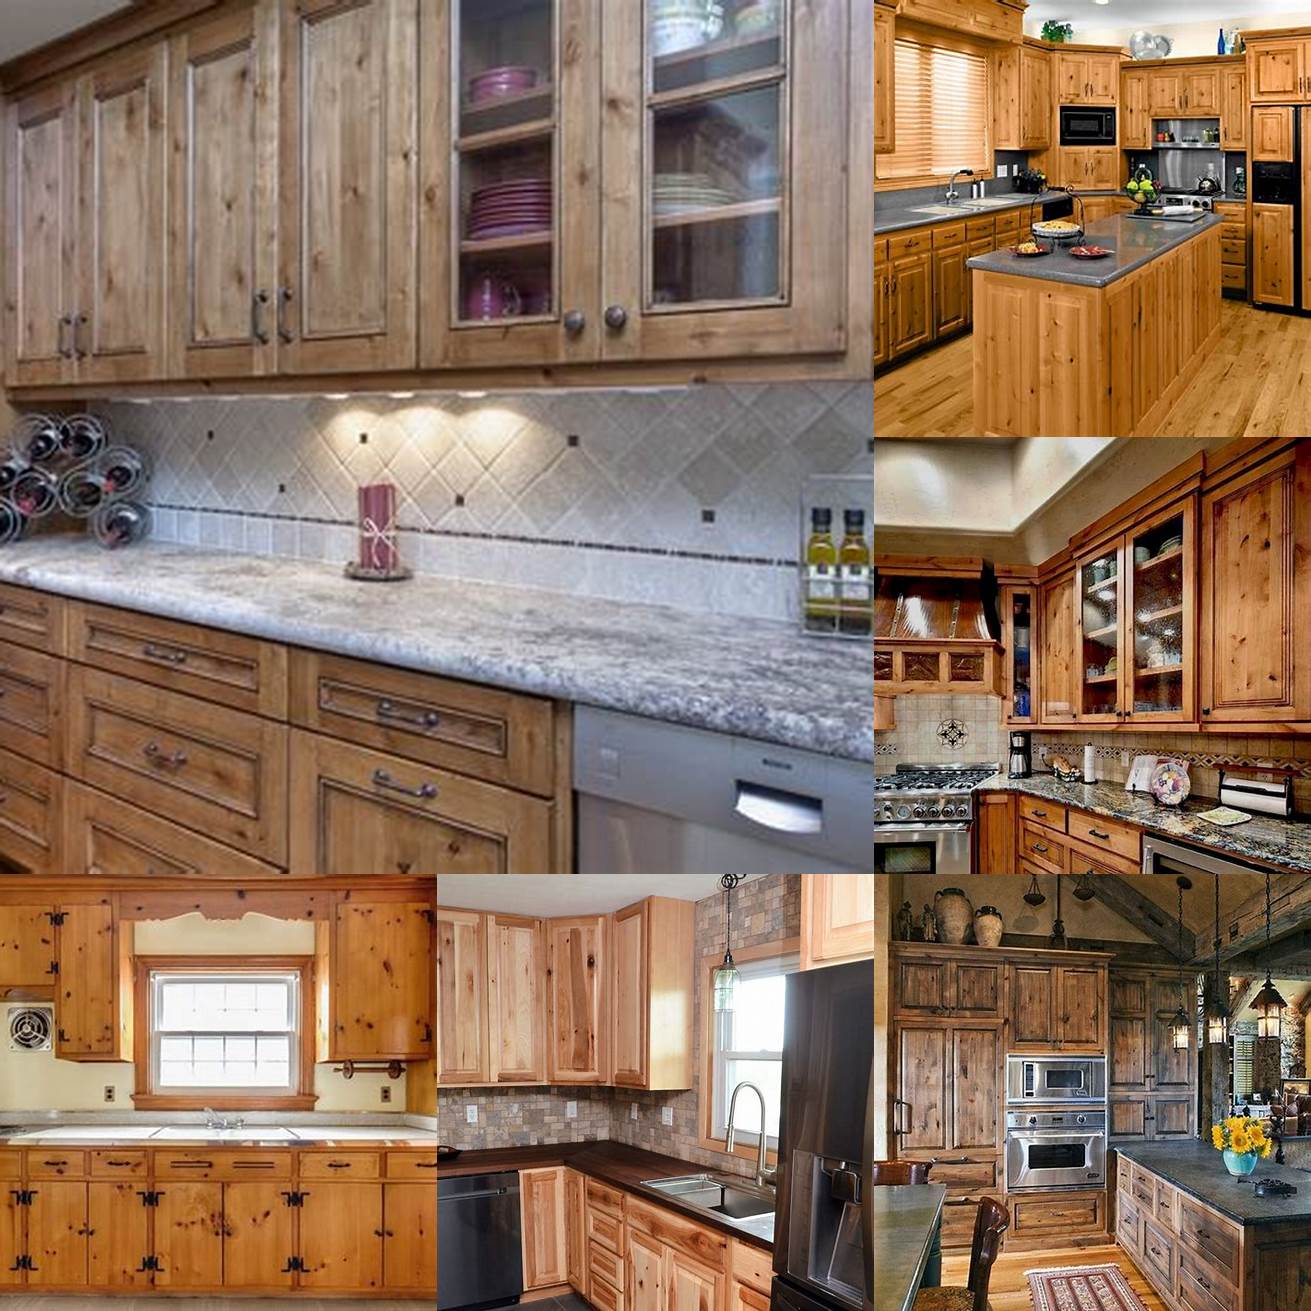 Pine cabinets can add a touch of warmth and charm to a rustic kitchen